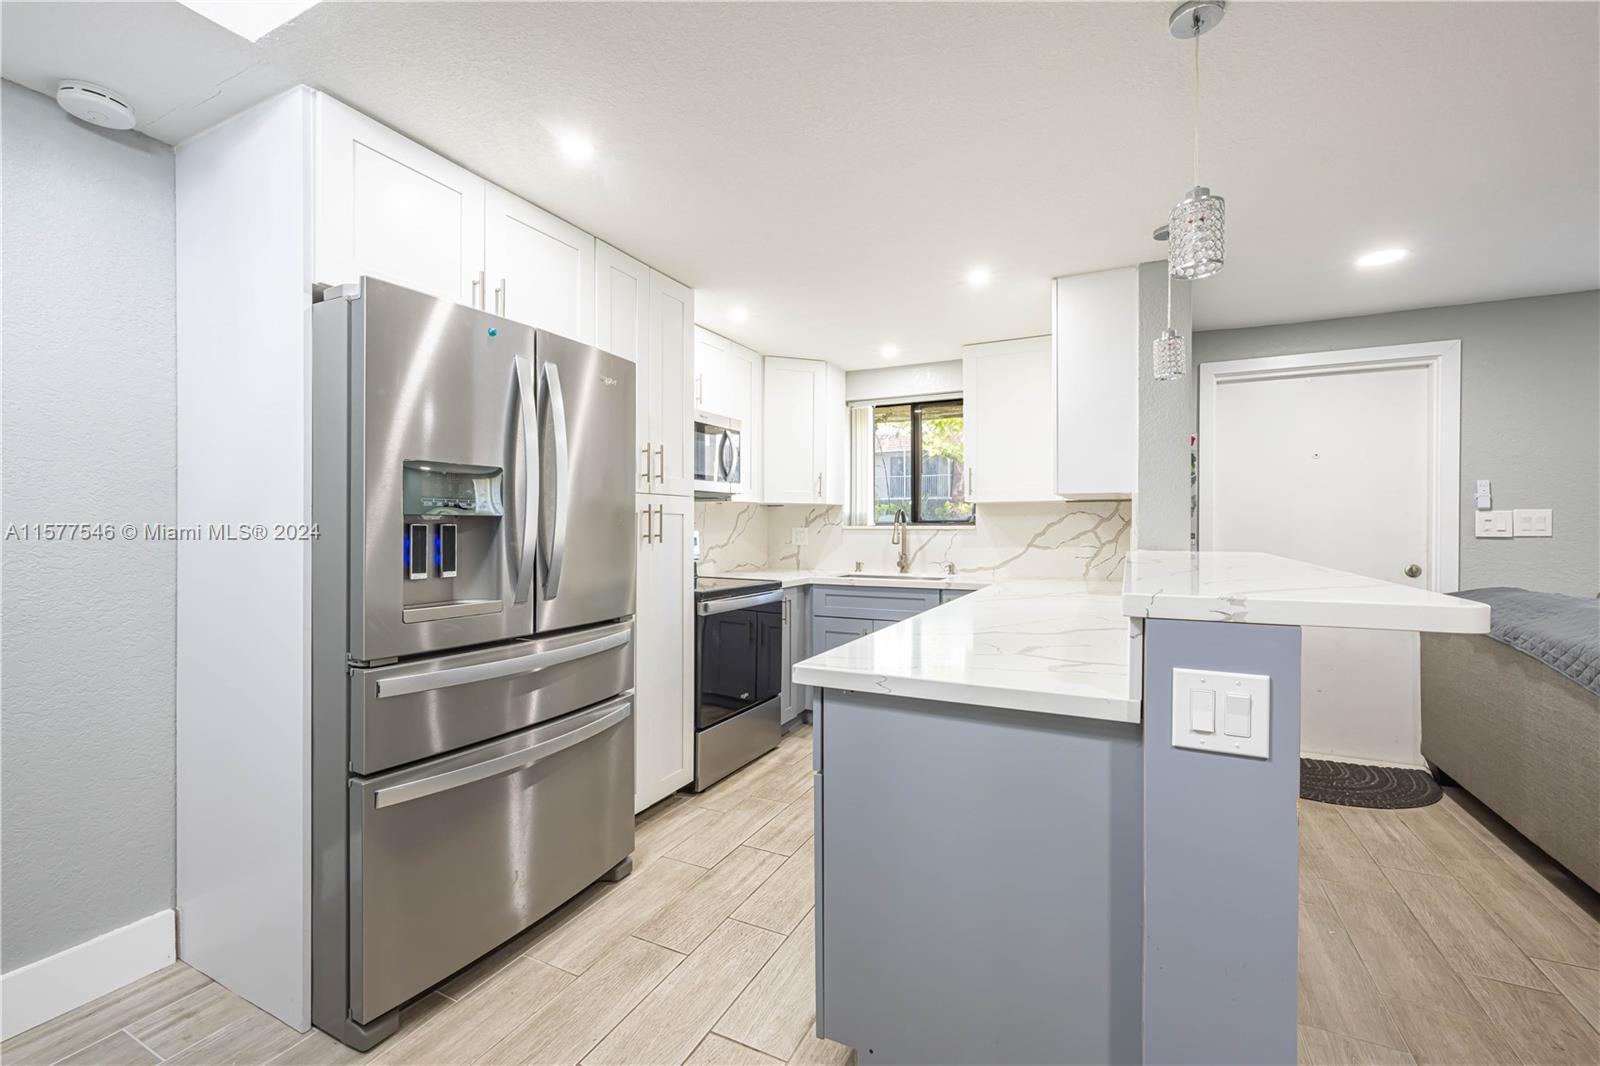 OFFERING A COZY COMPLETELY REMODELED 902 sqft 2br/2br TOWNHOUSE LOCATED IN THE POMPANO BEACH. THIS A